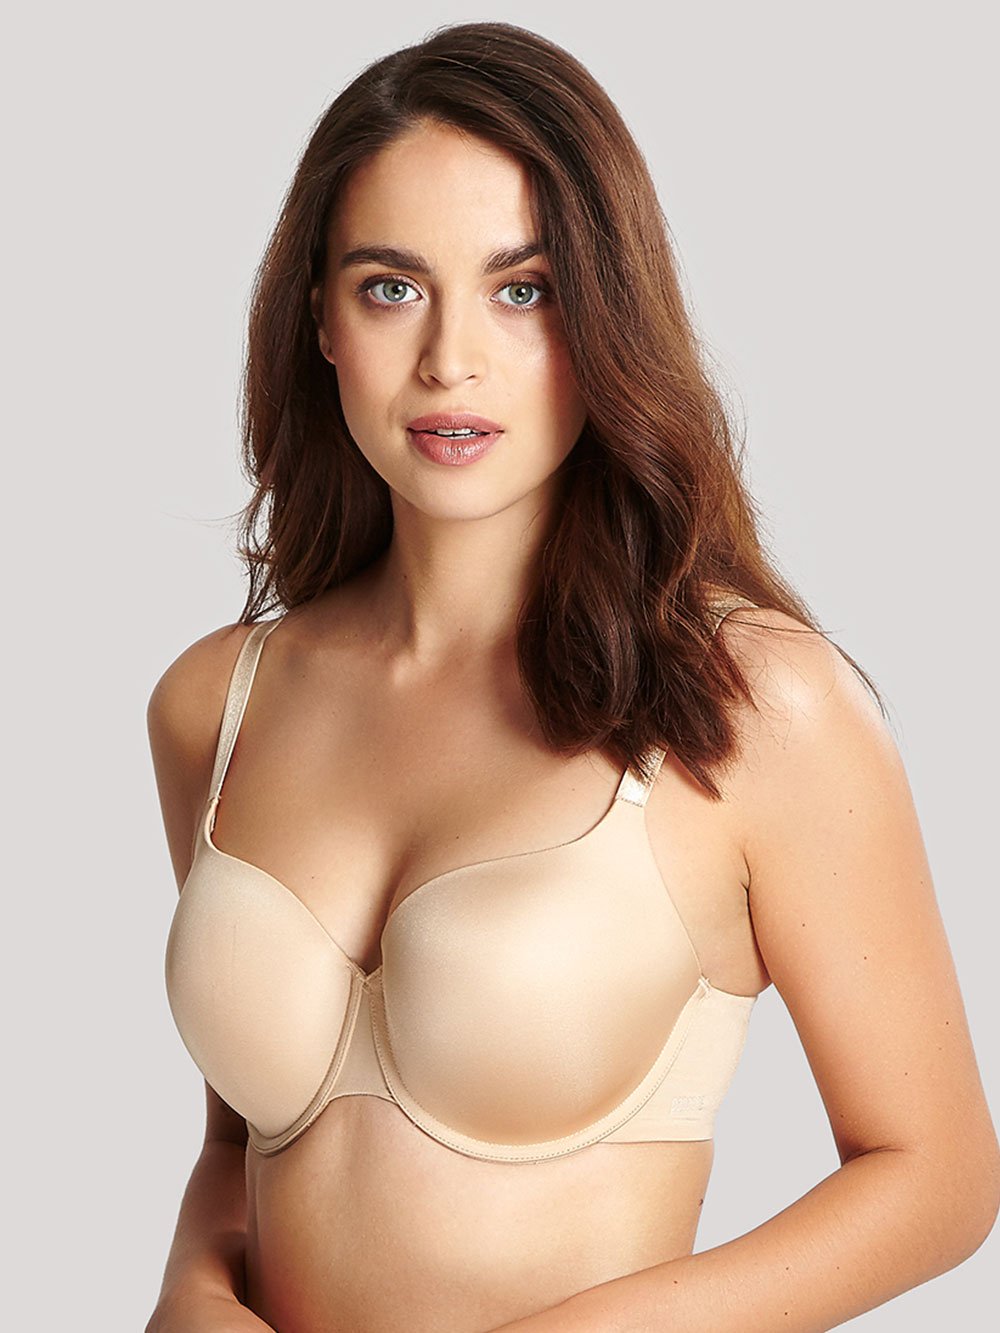 D Cup Bra: Bras for D Cup Boobs and Breast Size Tagged Panache